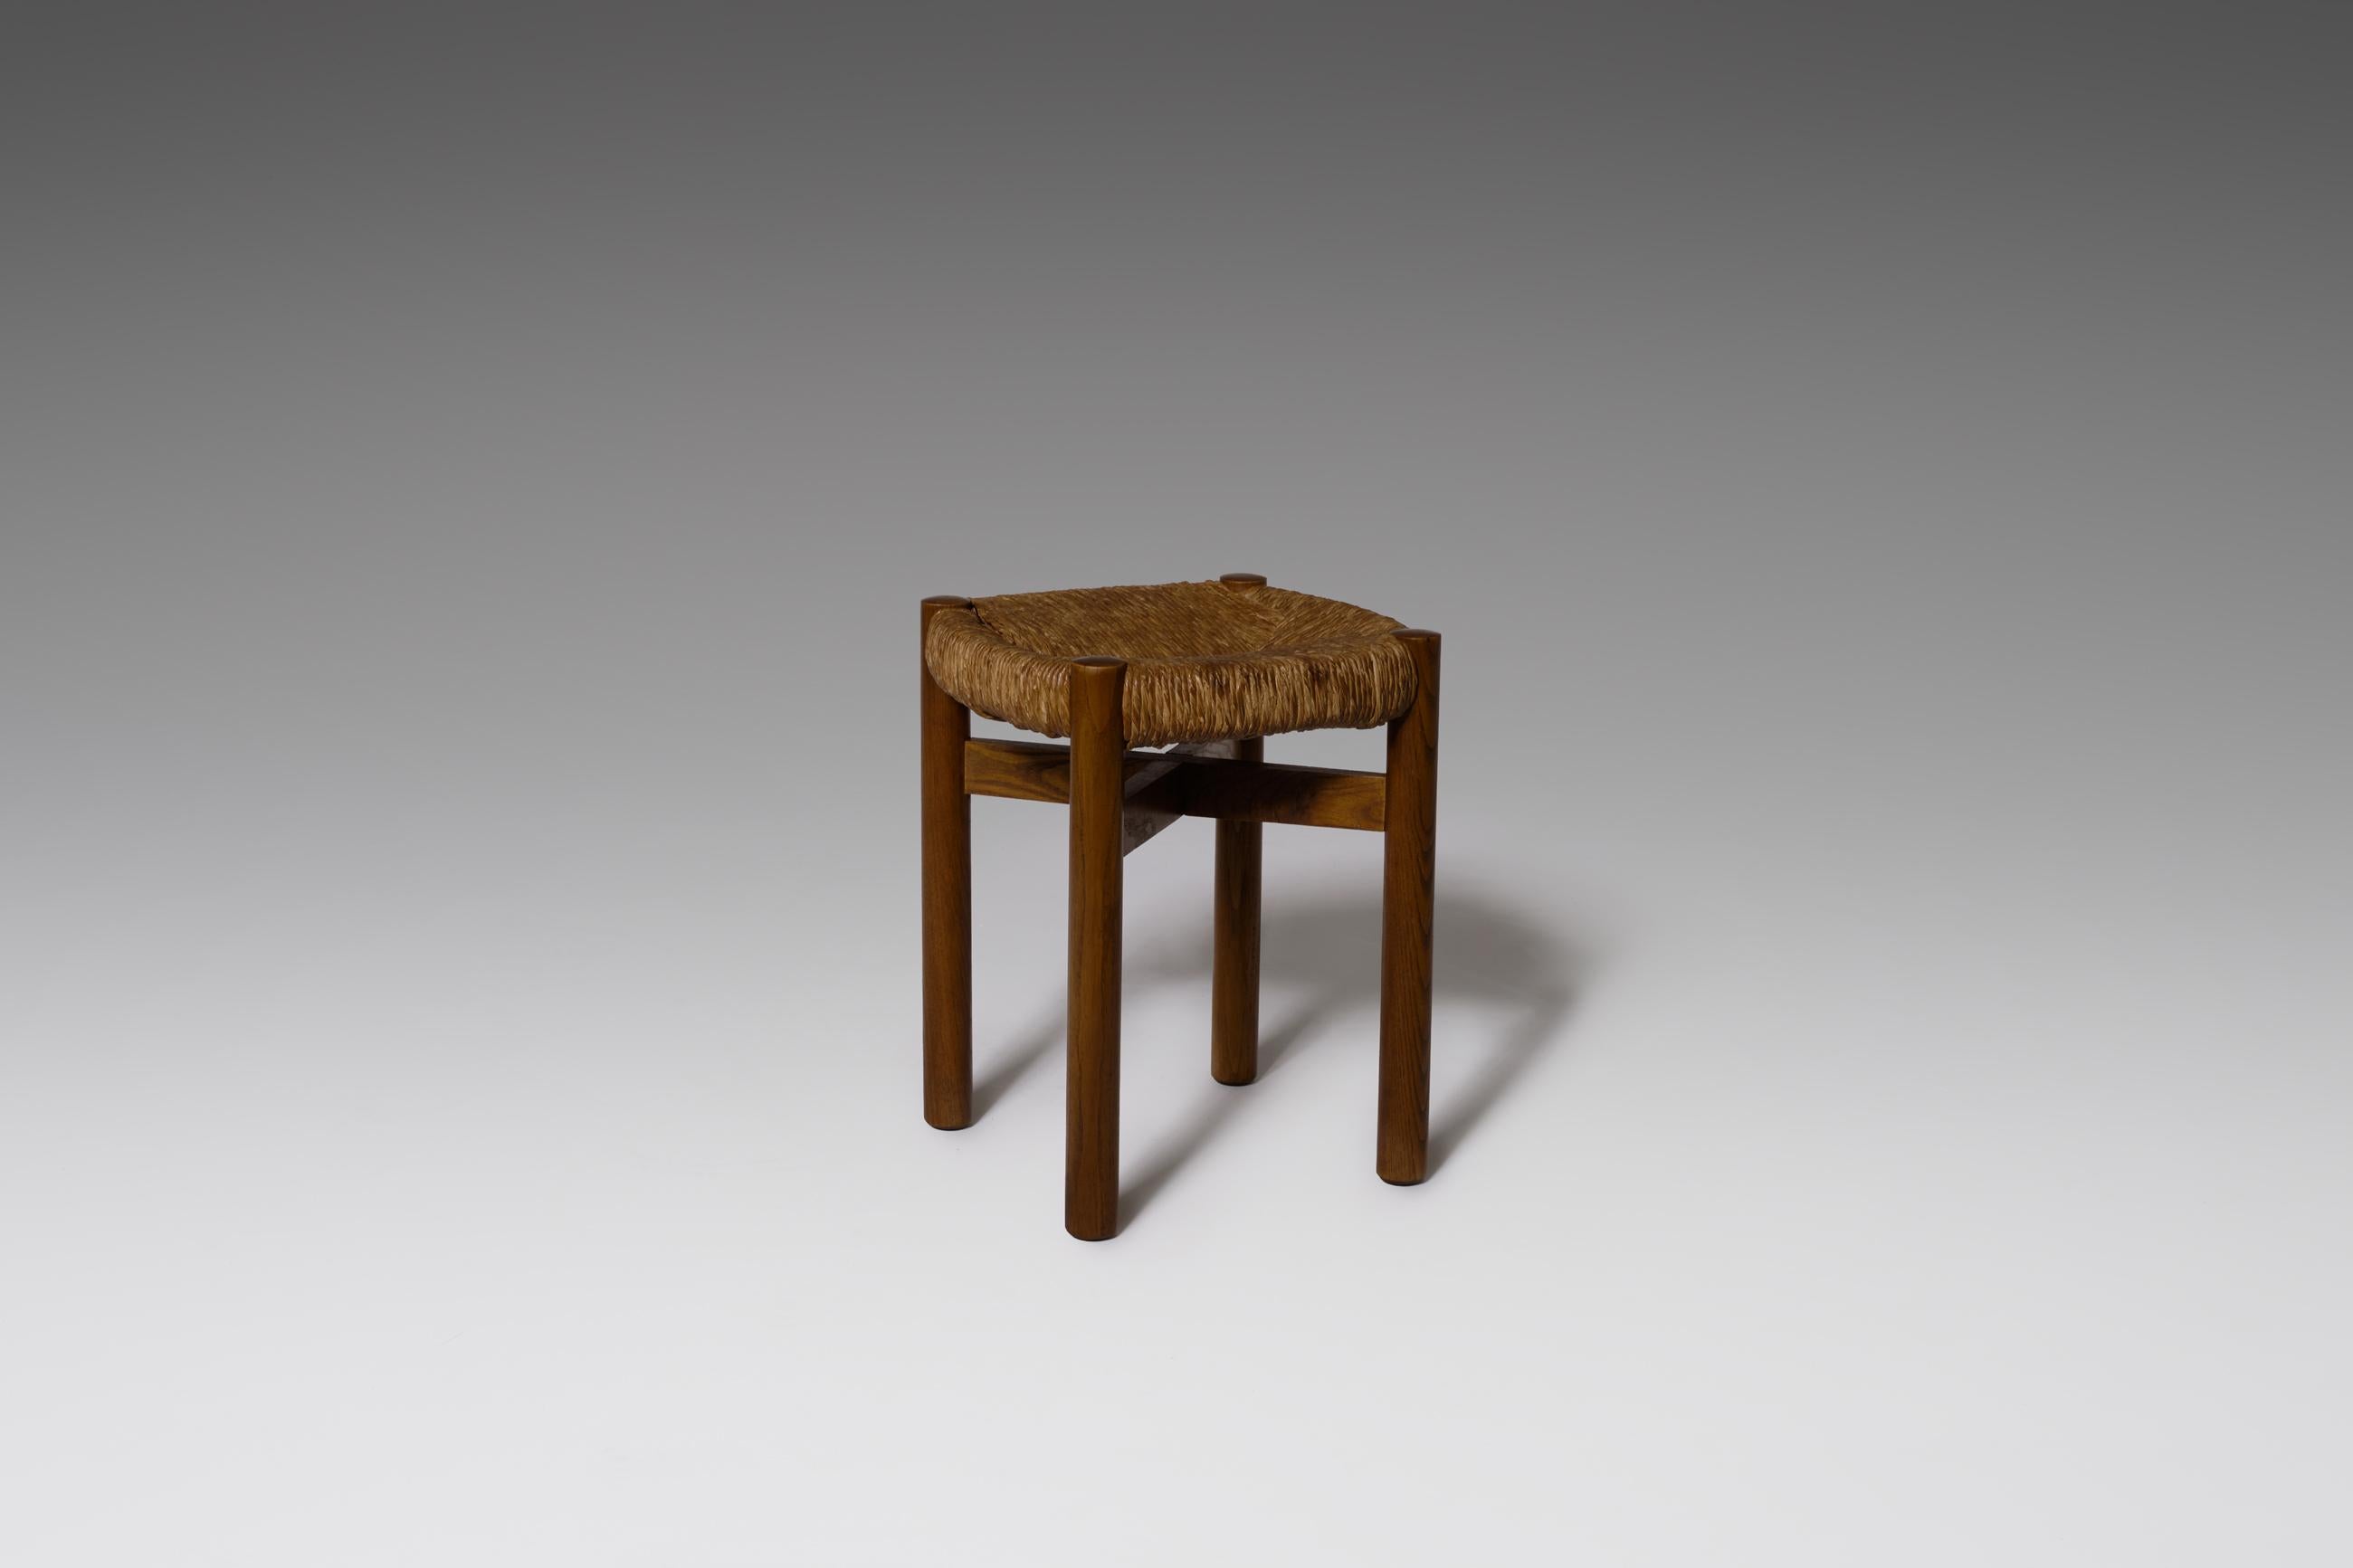 Important stool in stained ash and rush by Charlotte Perriand, France ca 1948. The stool was originally used in the Chalet-Hotel 'Le Doron' in ski resort Meribel Les Allues, which was built between 1946-1948 by architects Paul Grillo & Christian